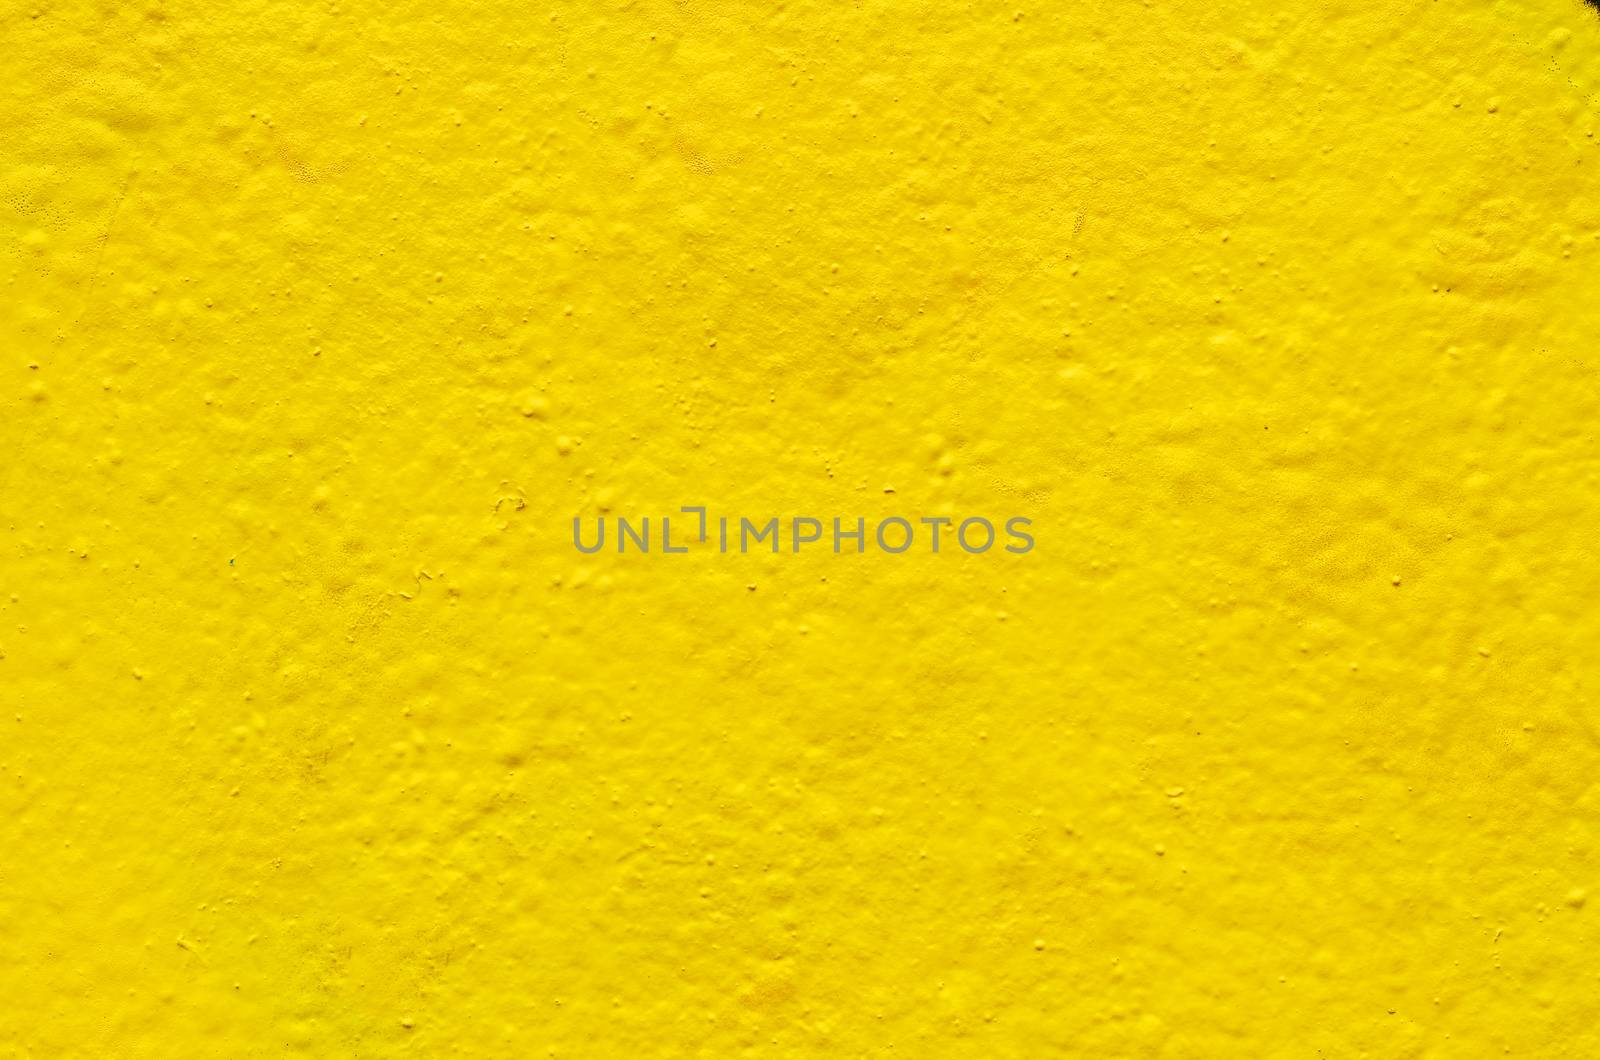 Yellow background image on the cement wall